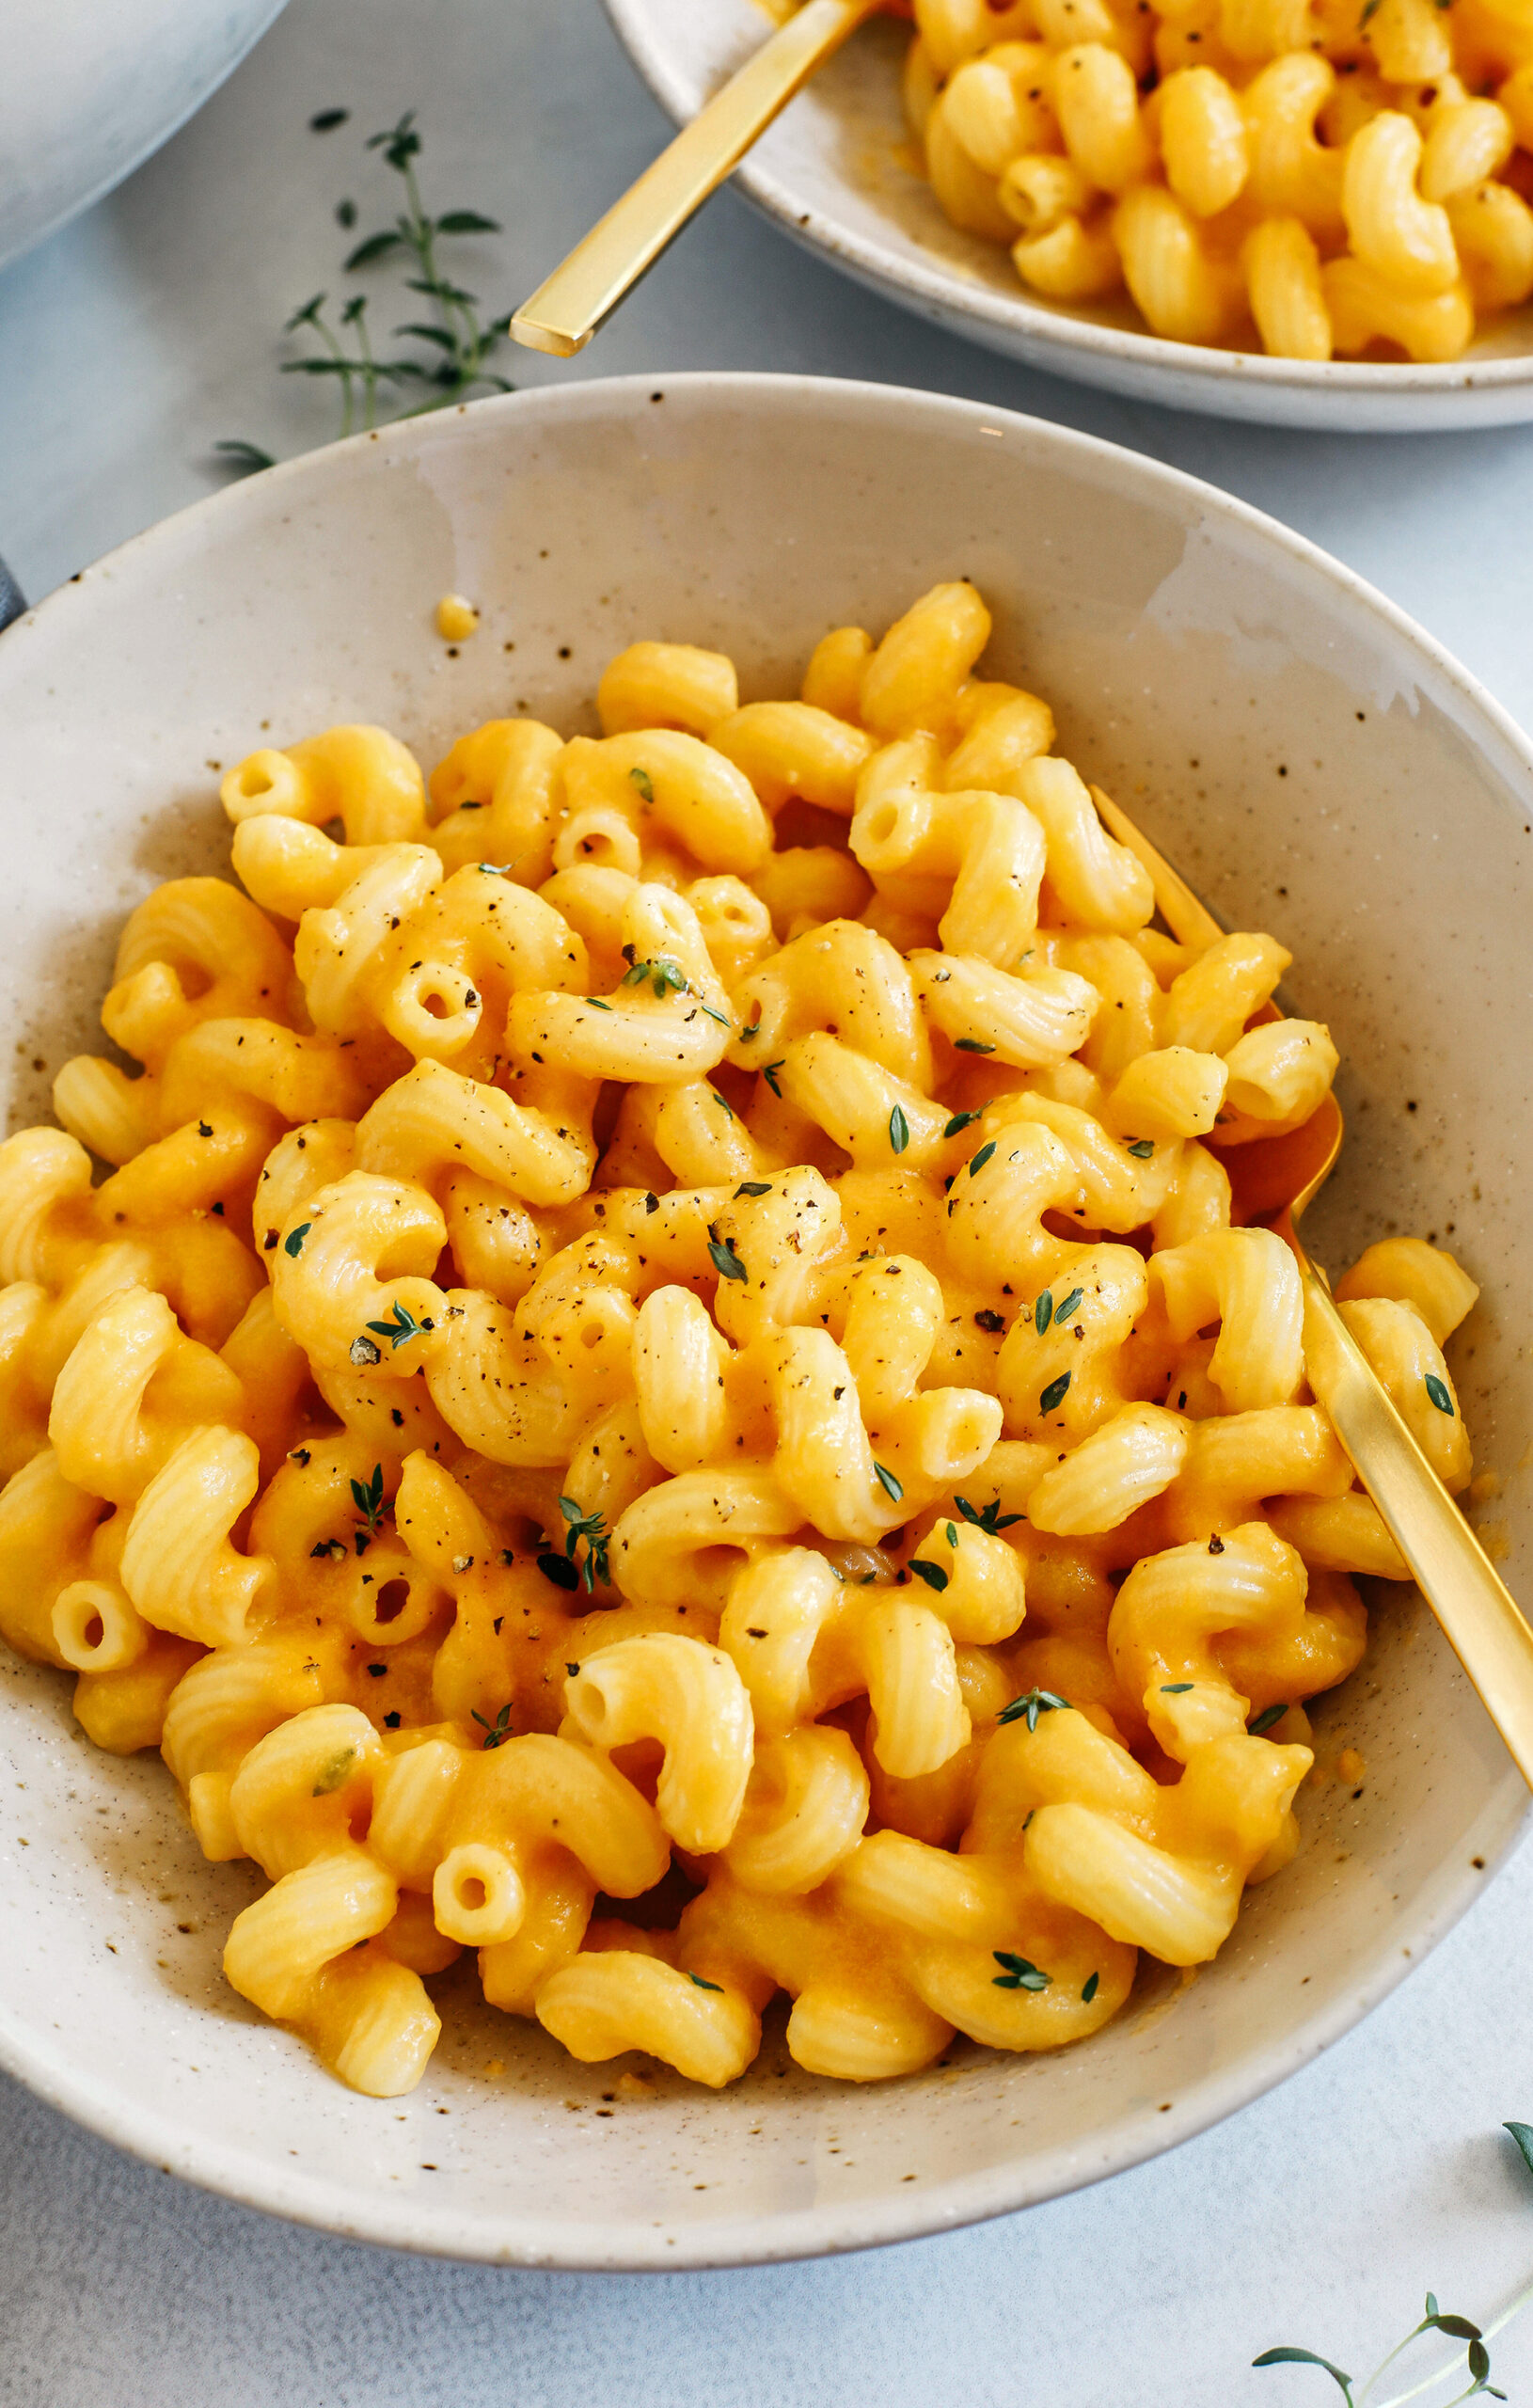 This One Pot Butternut Squash Mac and Cheese is rich, extra creamy, and loaded with so much incredible flavor!  Easily made in just 30 minutes for a cozy weeknight dinner the whole family will love!